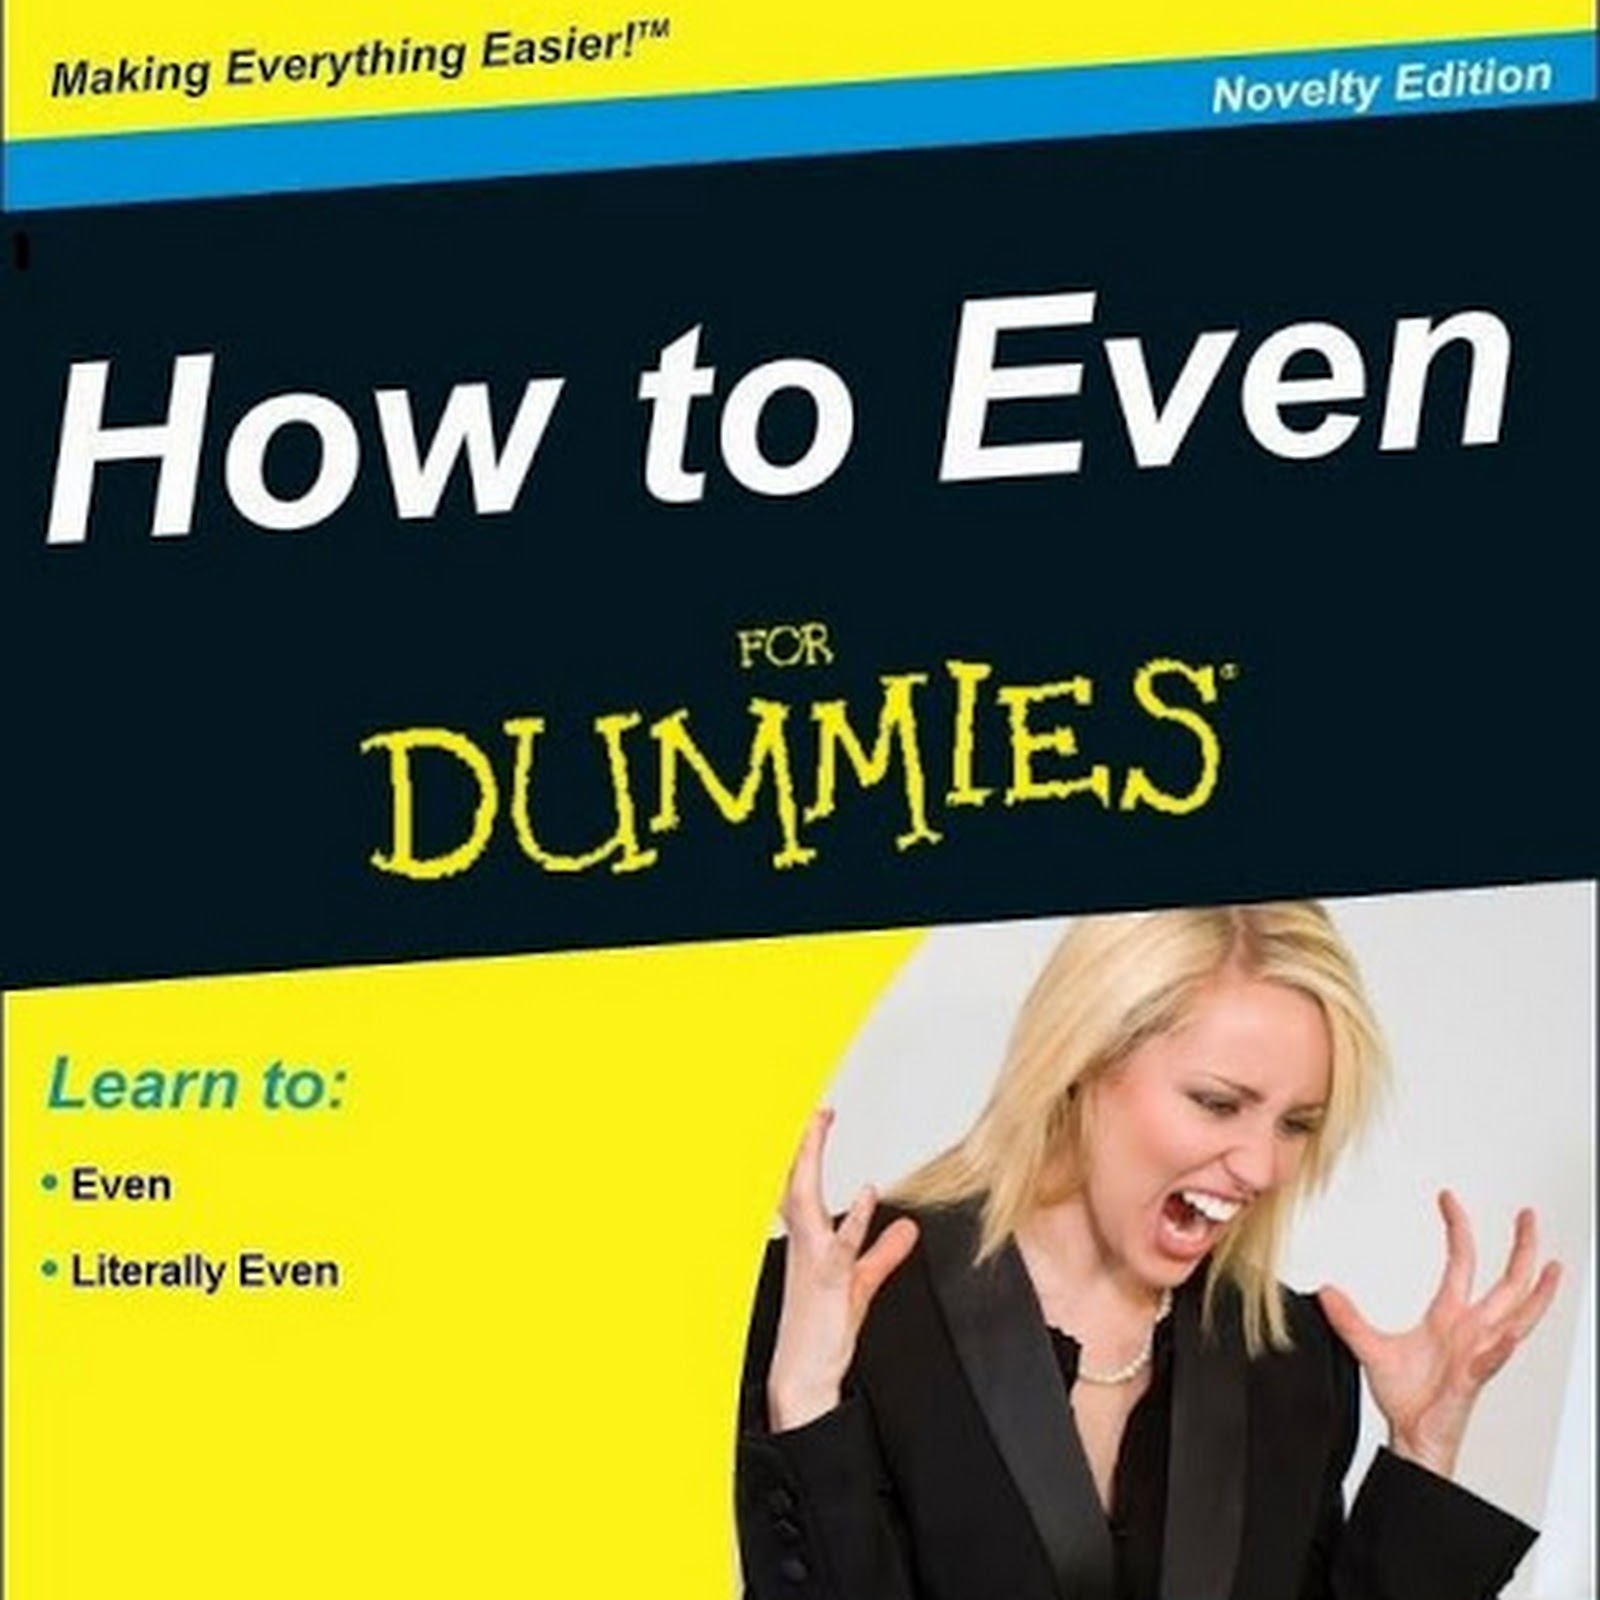 how-to-even-for-dummies.jpg